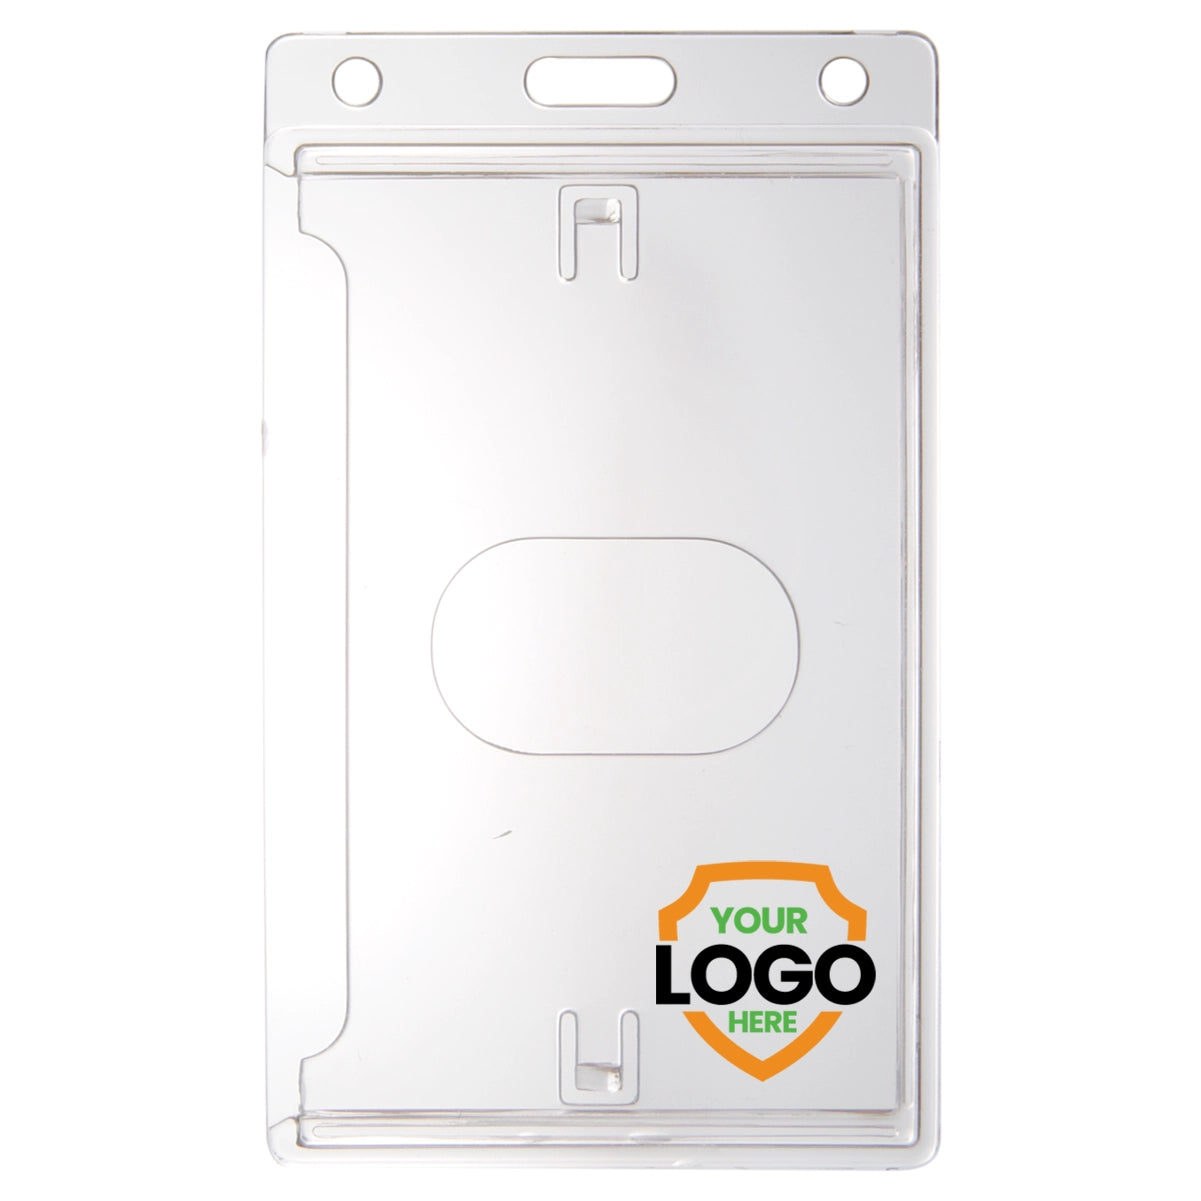 Custom Vertical Badge Holder - Crystal Clear Hard Plastic side load easy access - add your logo to personalize